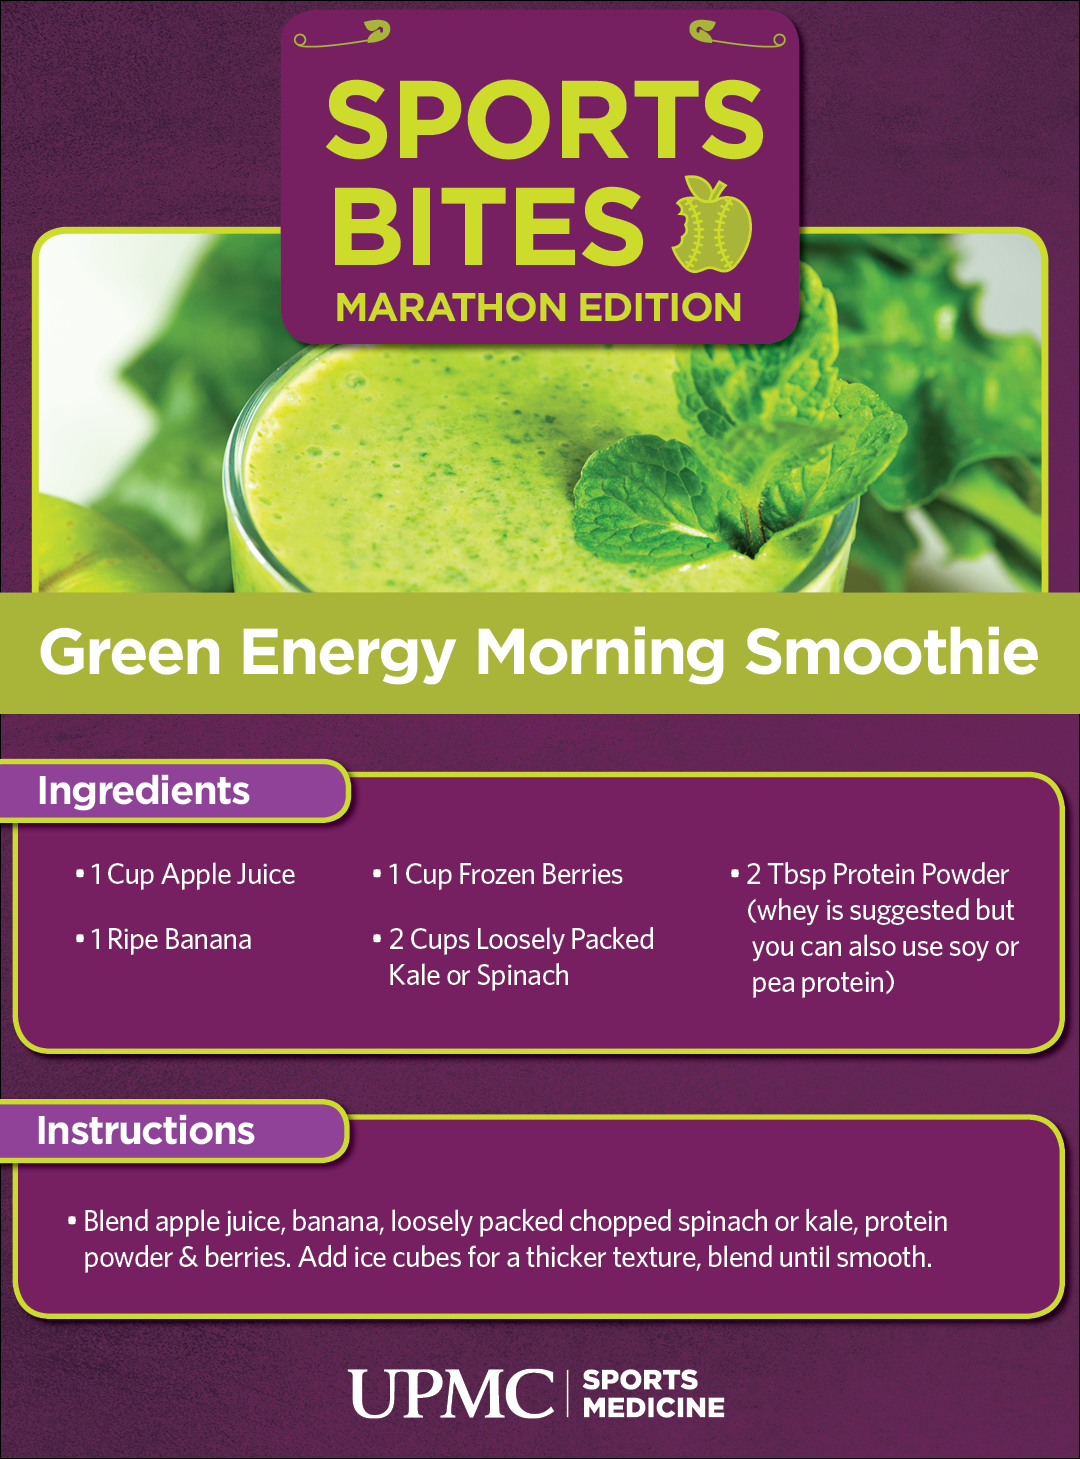 Learn how to make this green energy smoothie recipe